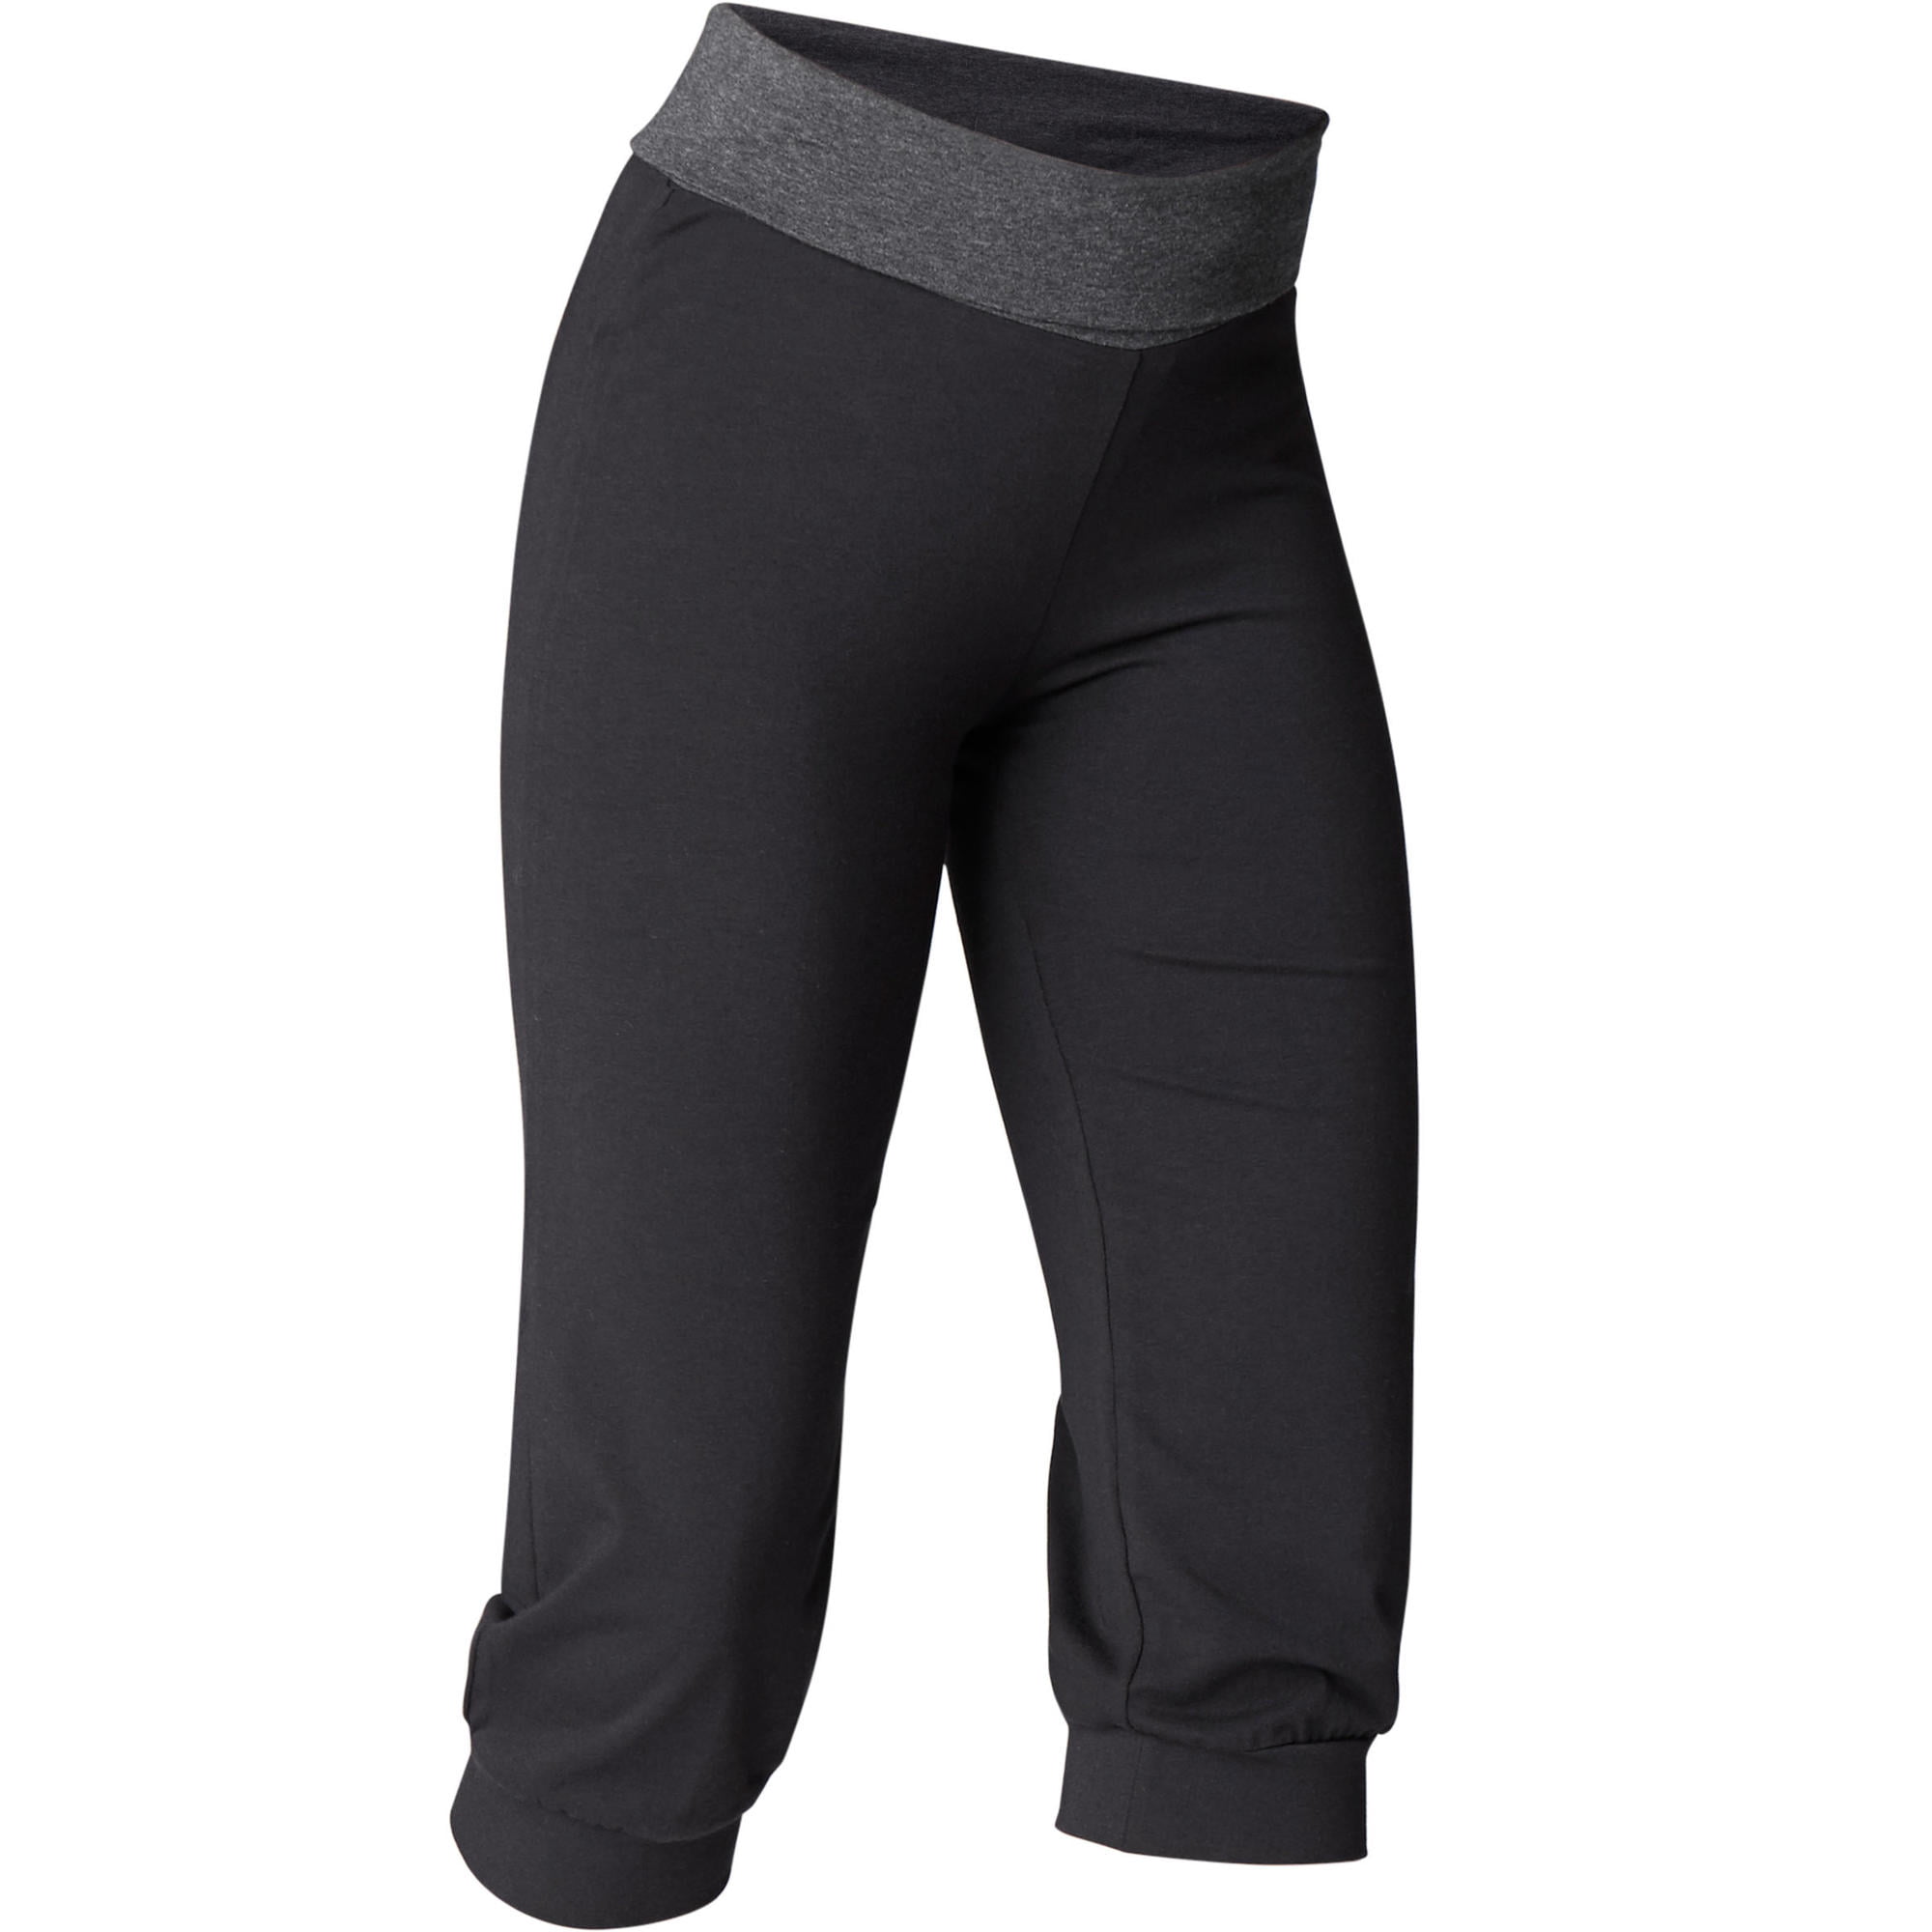 DOMYOS Bb1 Long Shape Women's Strength Training Trousers By Decathlon - Buy  DOMYOS Bb1 Long Shape Women's Strength Training Trousers By Decathlon  Online at Best Prices in India on Snapdeal